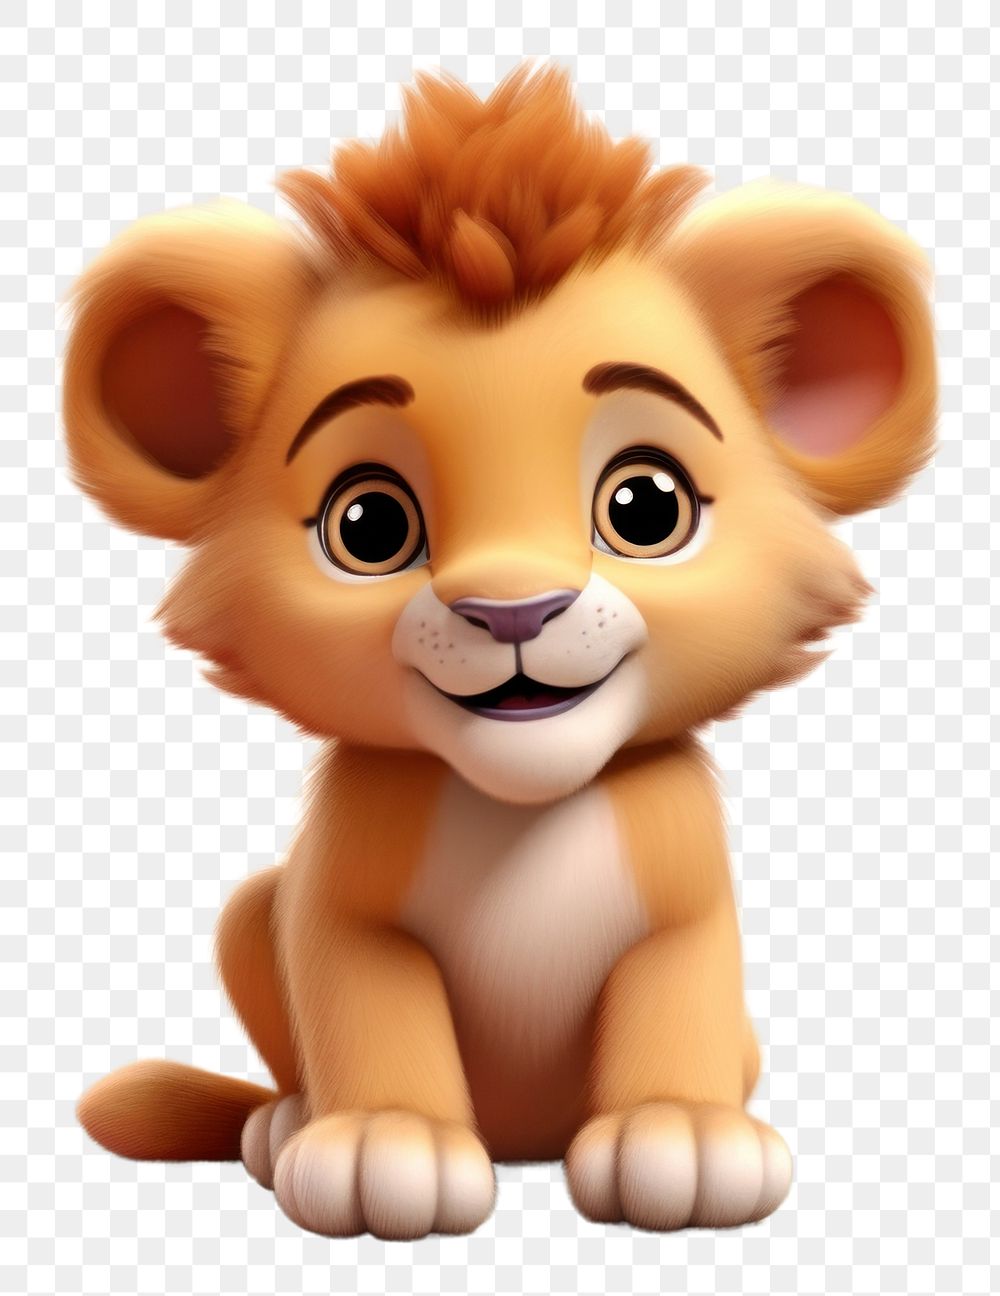 PNG Cute baby lion background cartoon toy representation